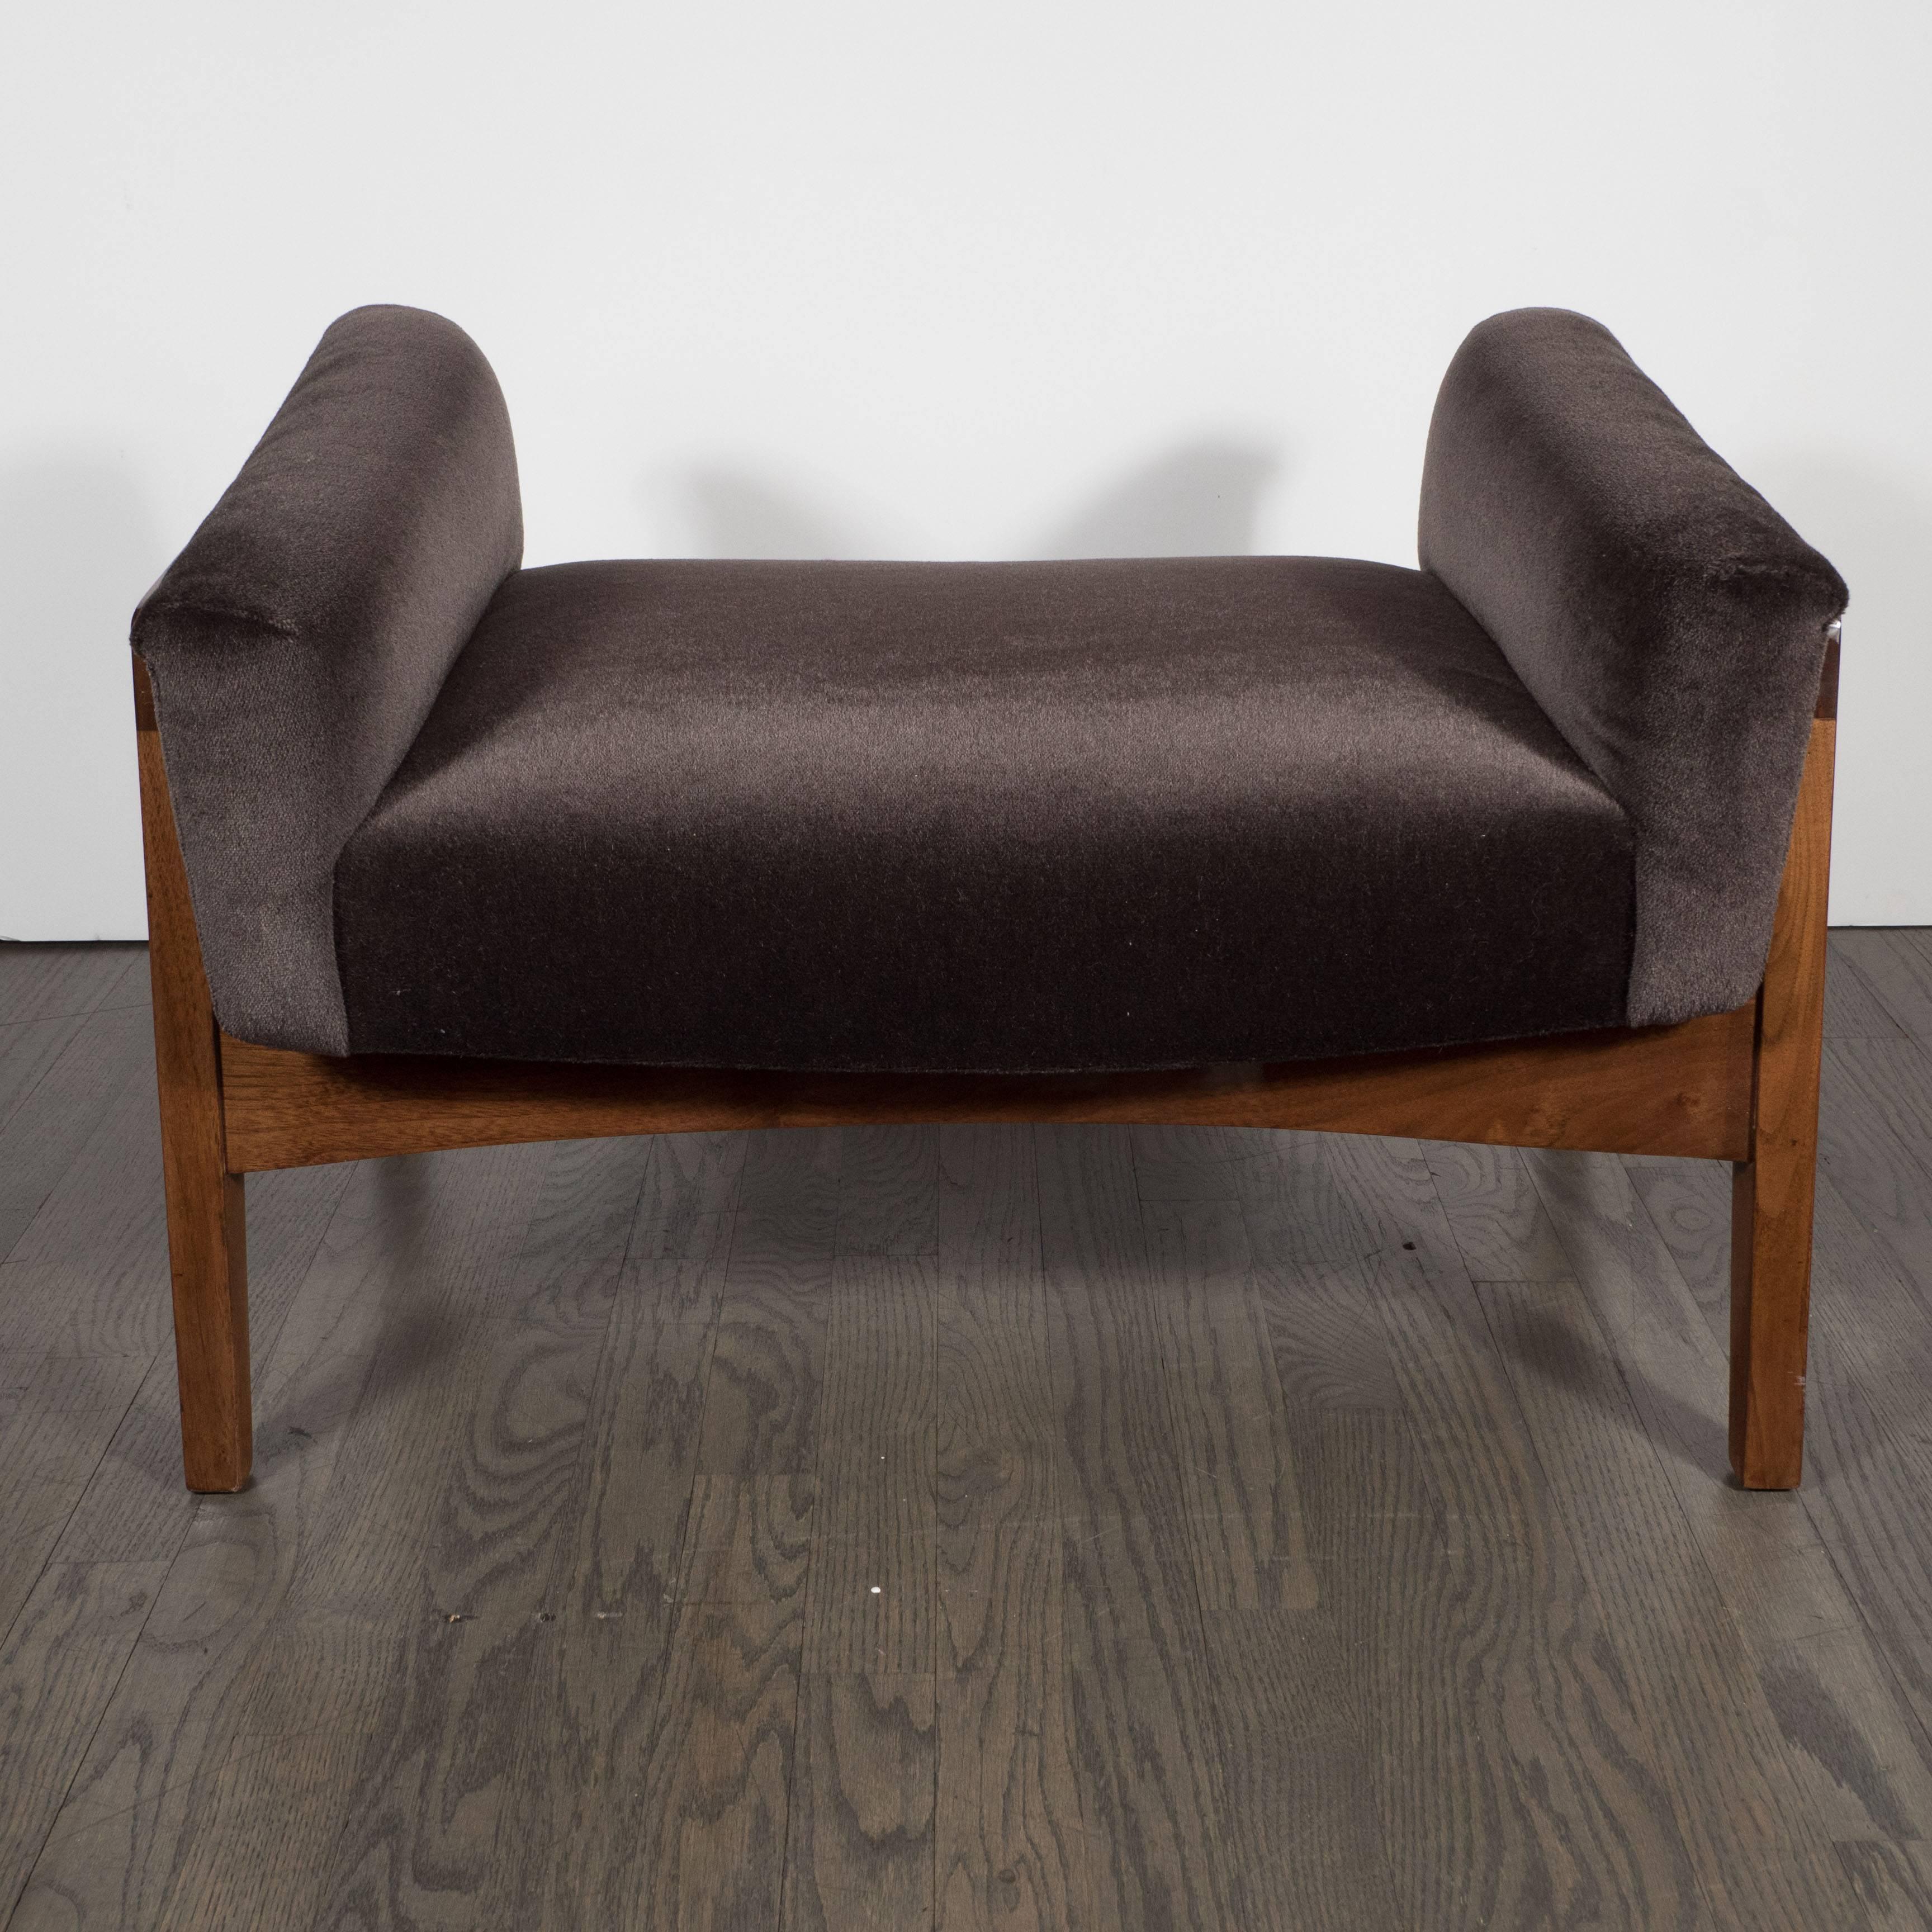 American Mid-Century Bench /Foot Stool in Chocolate Mohair and Hand-Rubbed Walnut